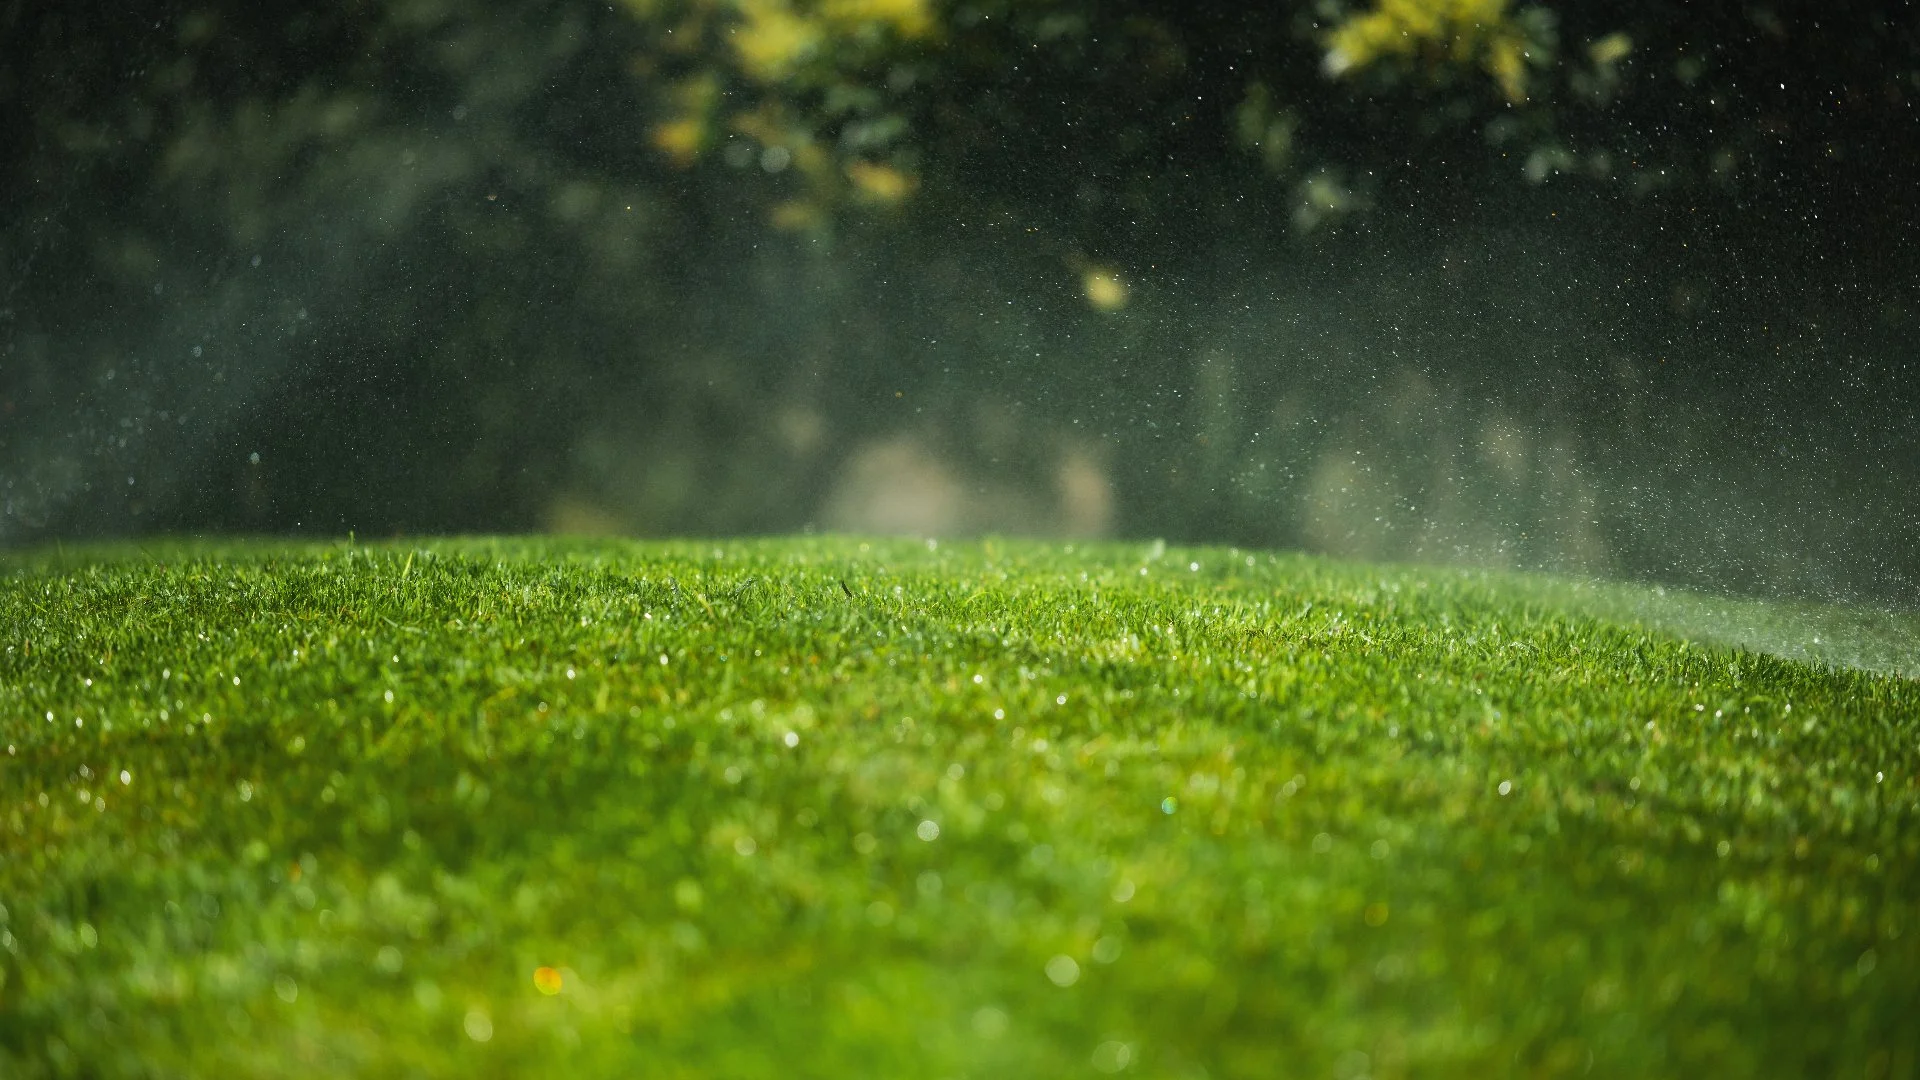 Liquid Aeration vs Core Aeration - Which Is Better for Your Lawn in the Spring?